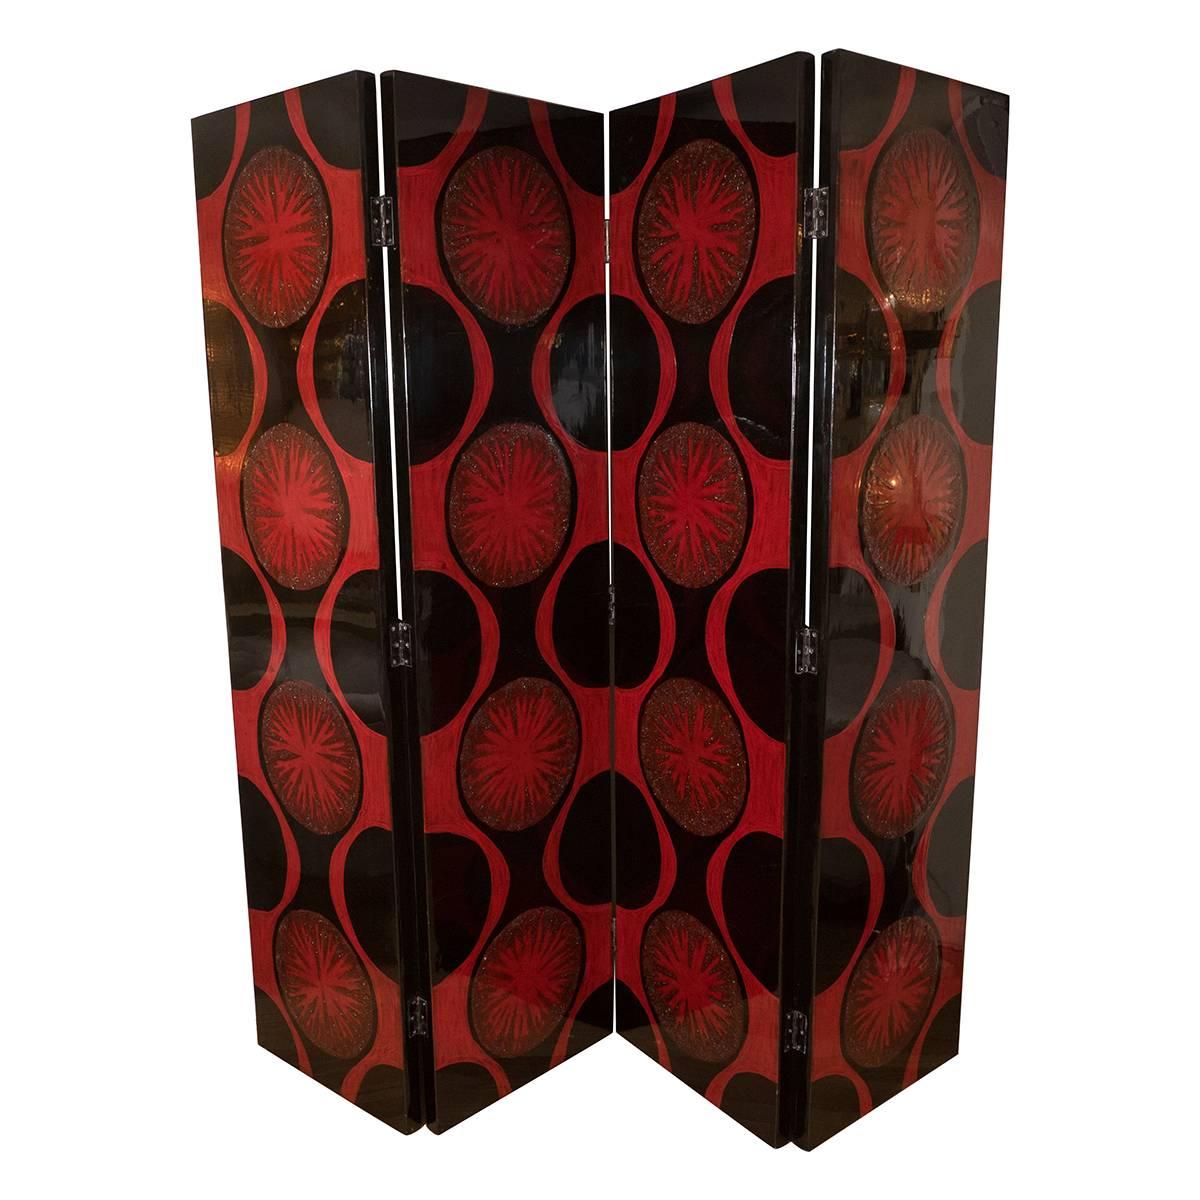 Four-Panel Black and Red Lacquered Wood Screen